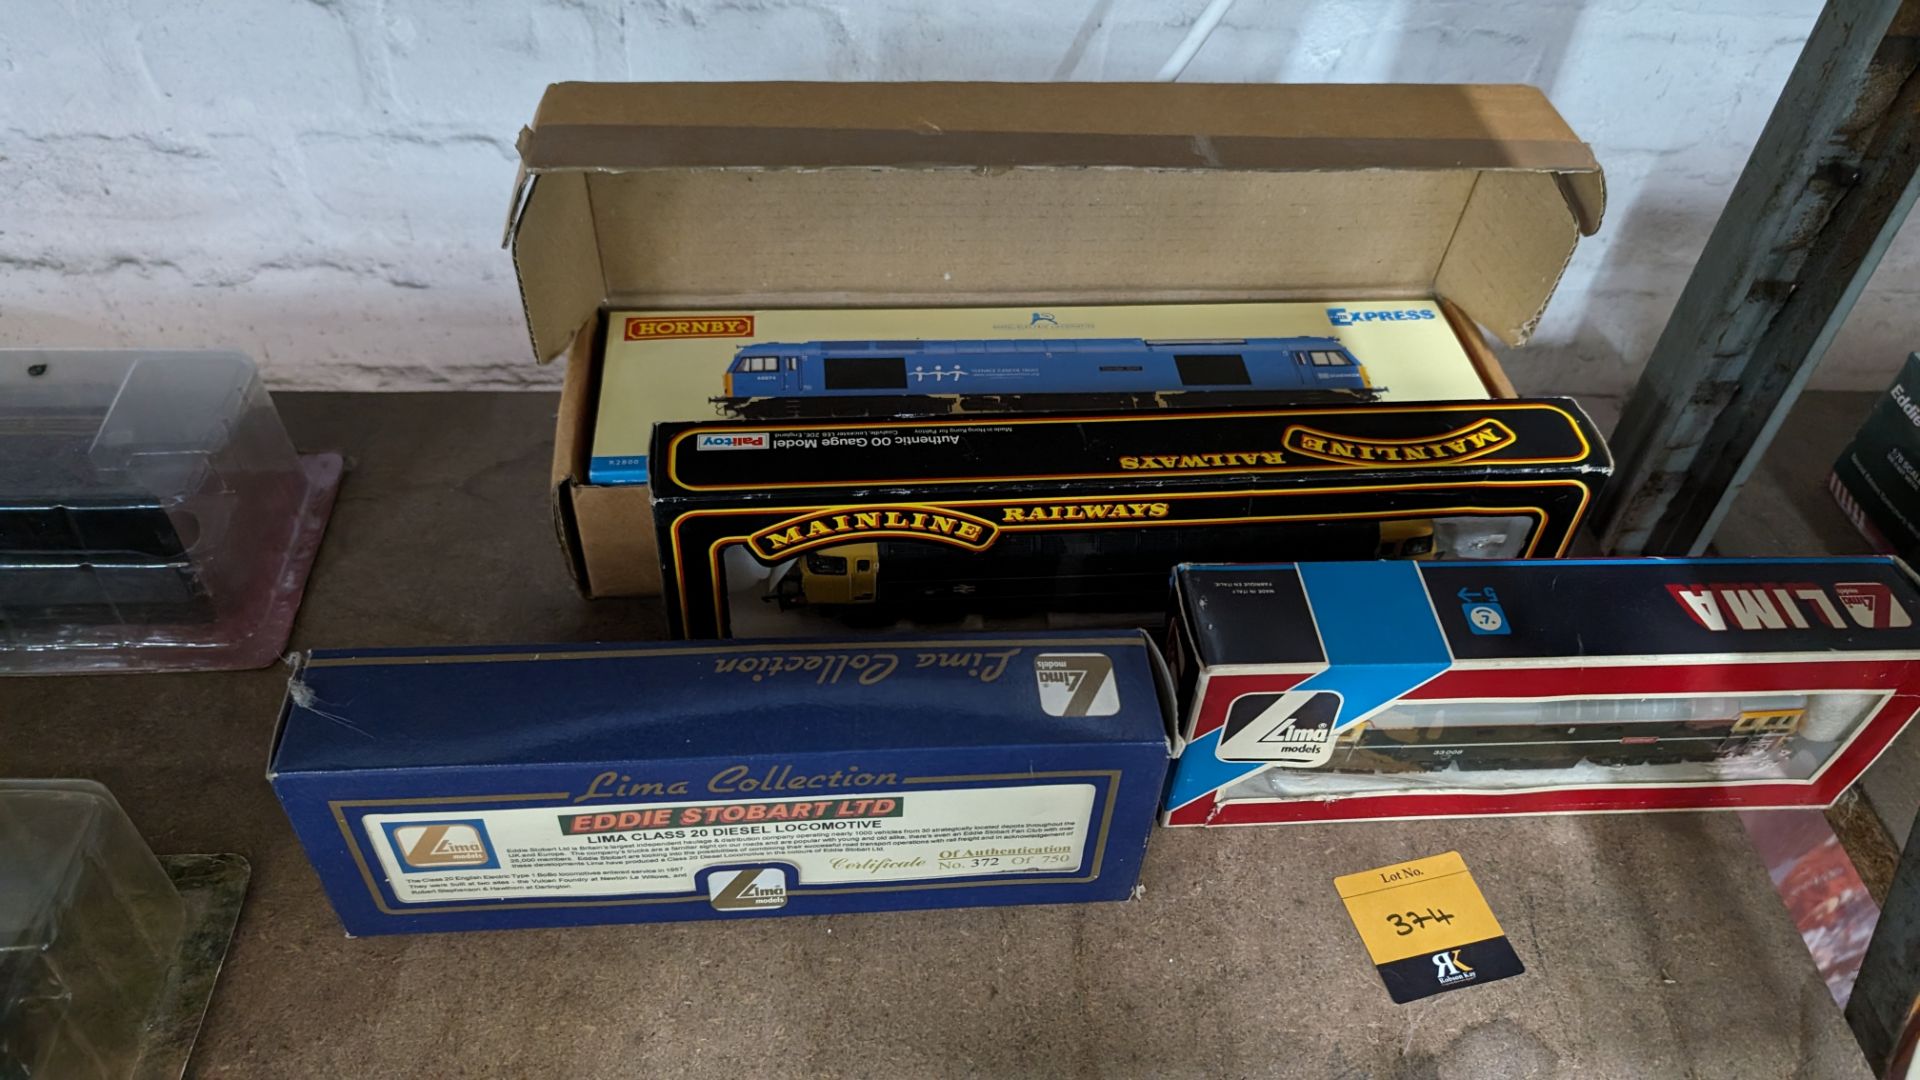 4 assorted 00 model trains by Lima, Hornby & Palitoy